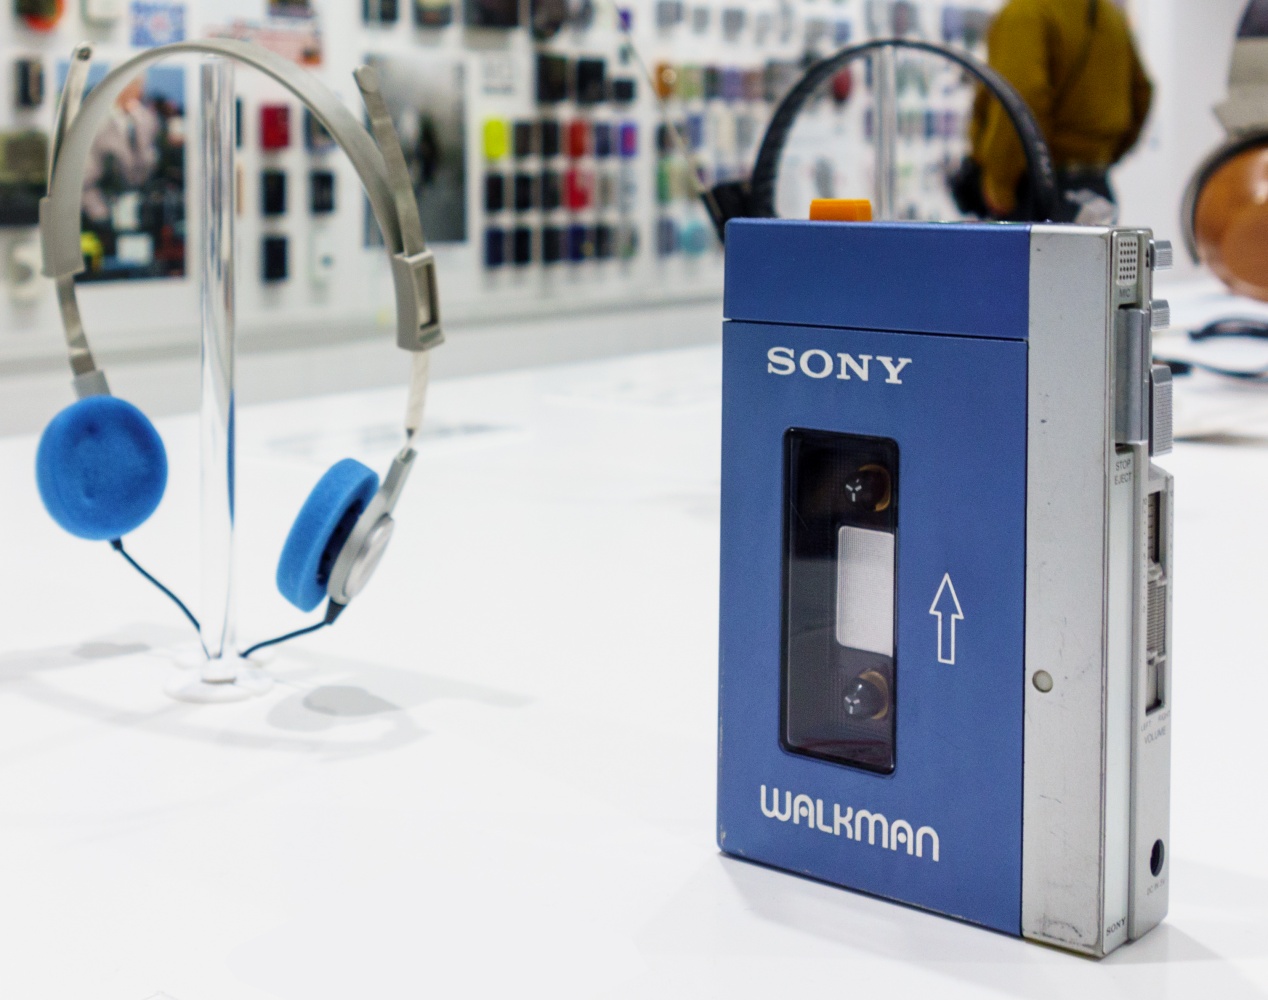 Smithsonian Collections Object: The Sony TPS-L2 “Walkman” Cassette Player,  National Museum of American History, walkman cassette 